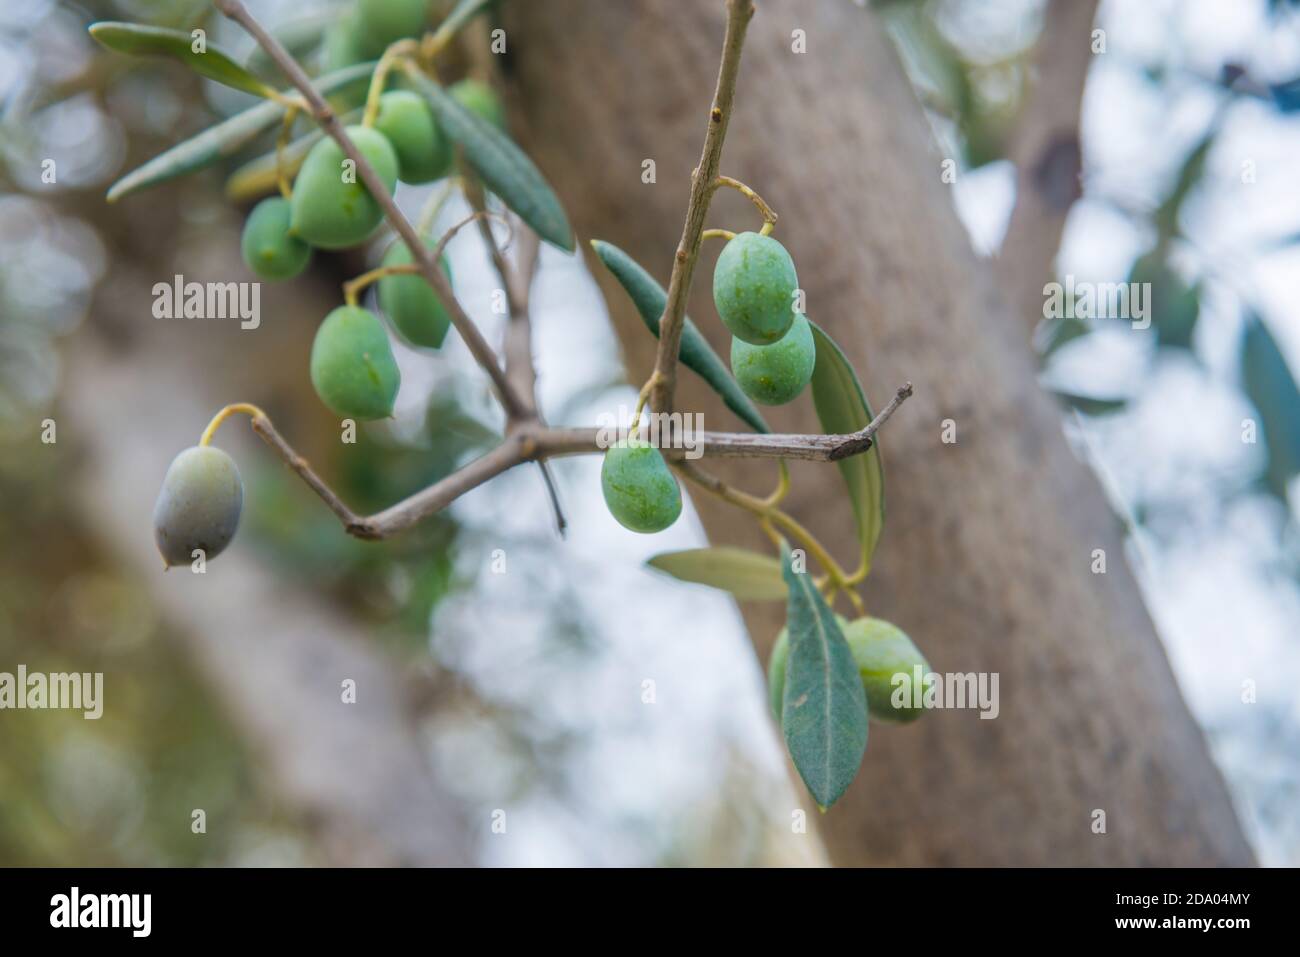 Branch of olive tree with olives. Stock Photo